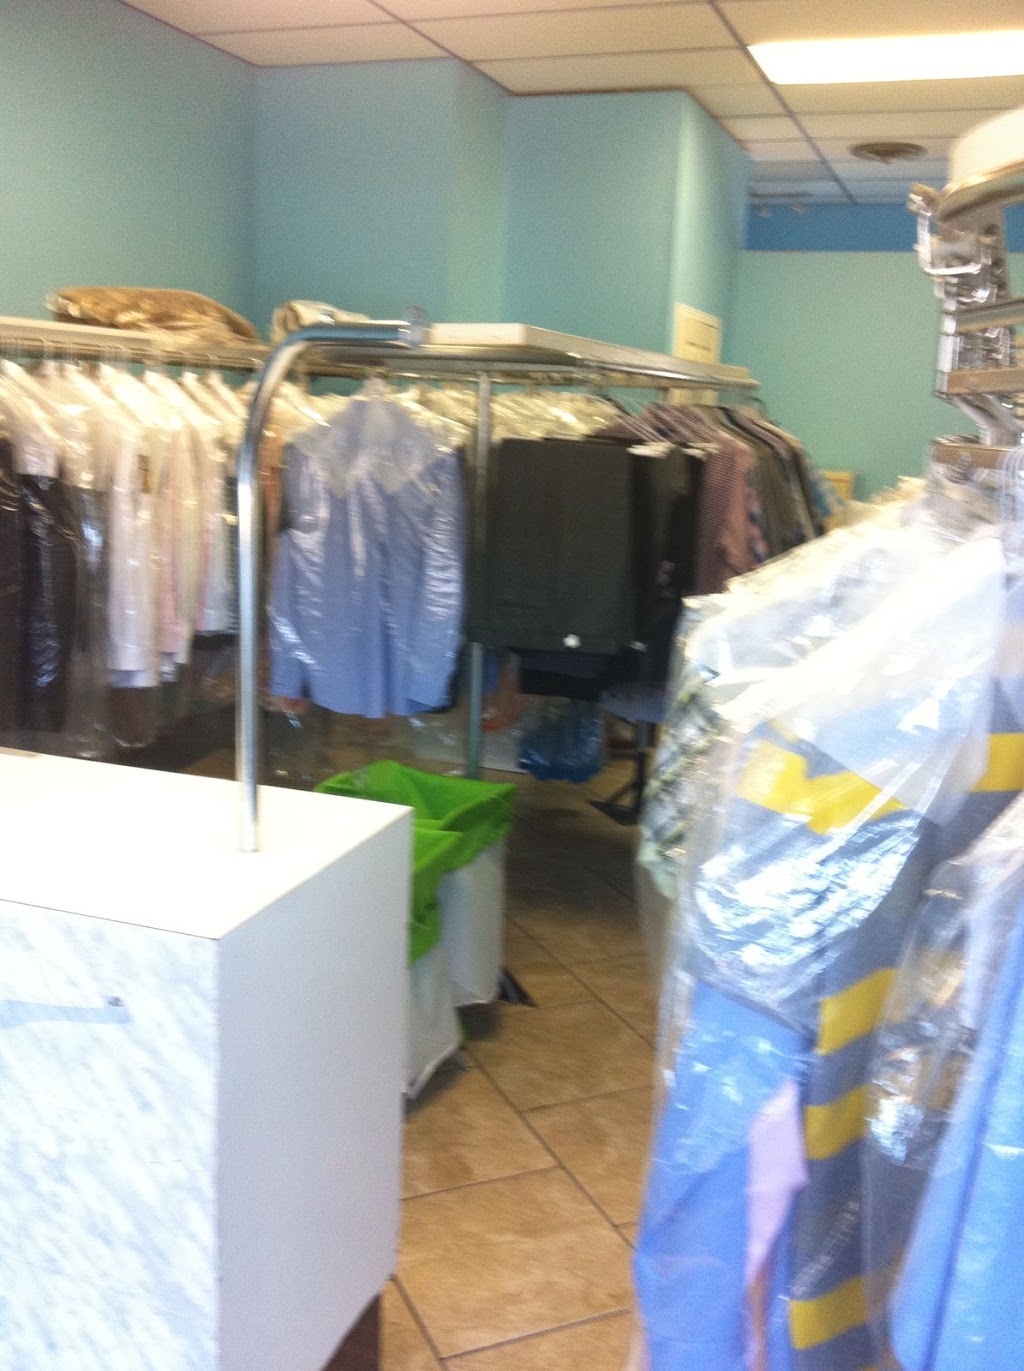 Georgetown Cleaners | 310 Guelph St #4, Georgetown, ON L7G 4B1, Canada | Phone: (905) 877-8877